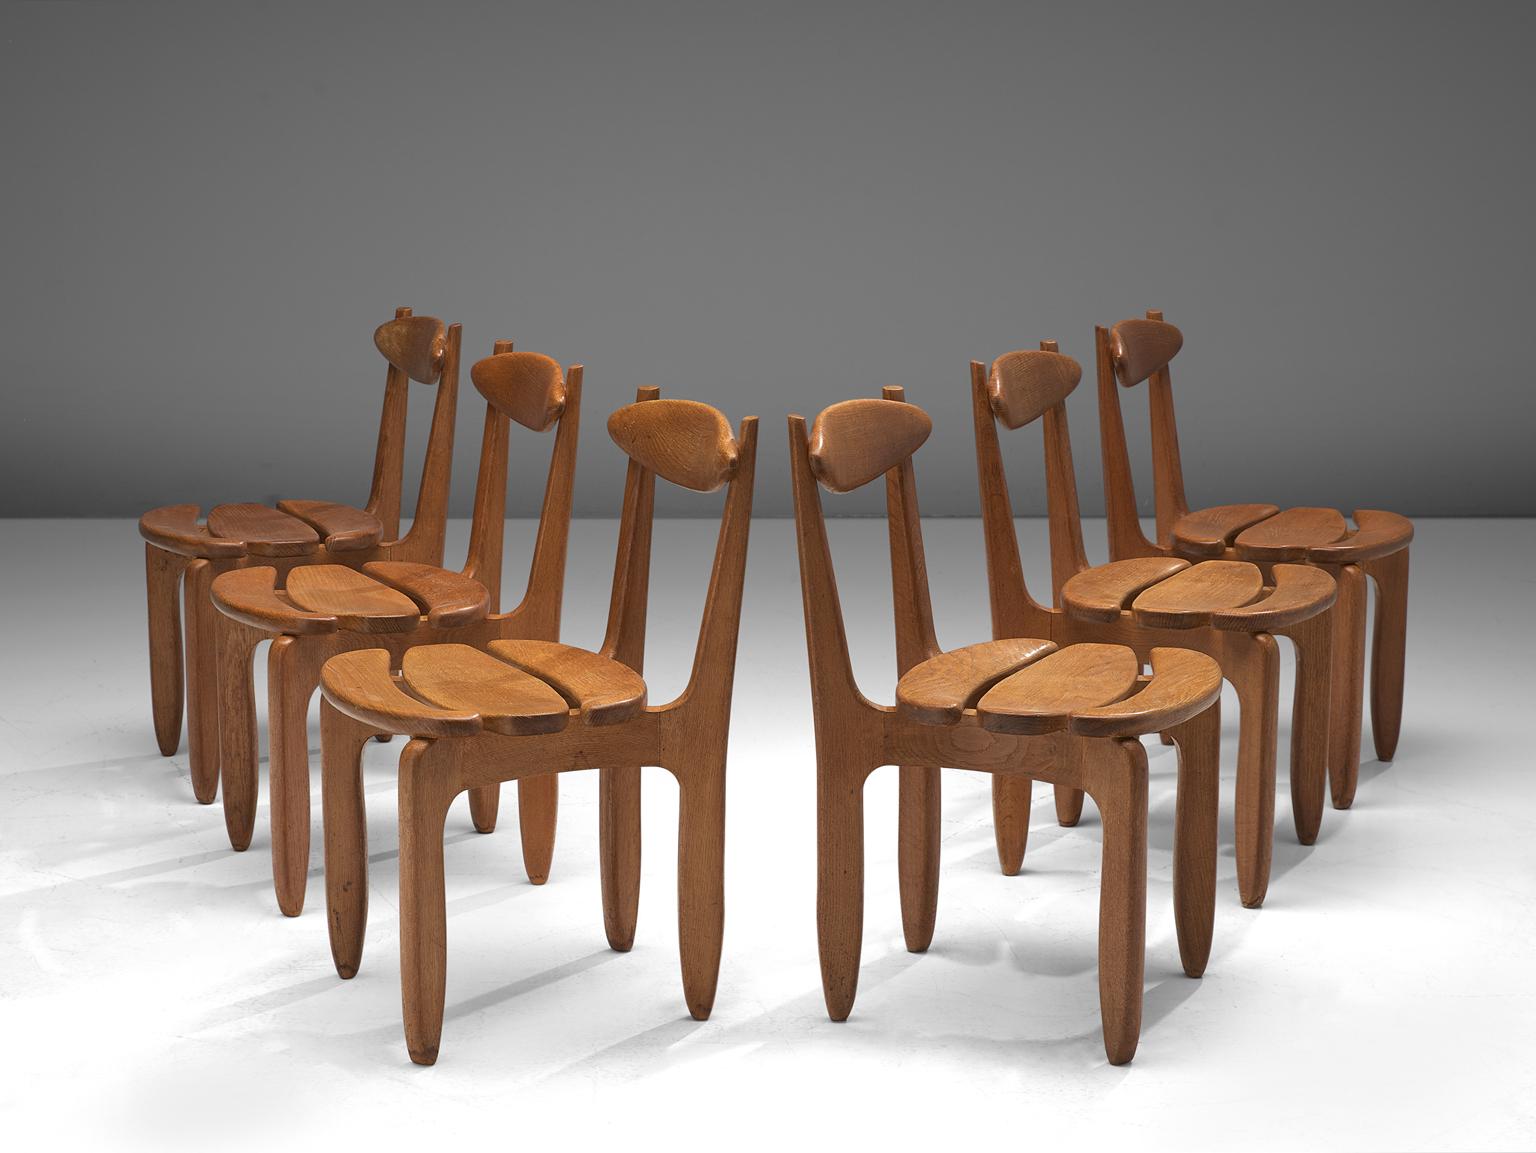 Guillerme et Chambron, set of 6 dining chairs, in oak, France, 1960s. 

Set of 6 elegant and robust dining chairs in solid oak by Guillerme and Chambron. These chairs show the characteristic frame of this French designer duo, well-crafted, solid